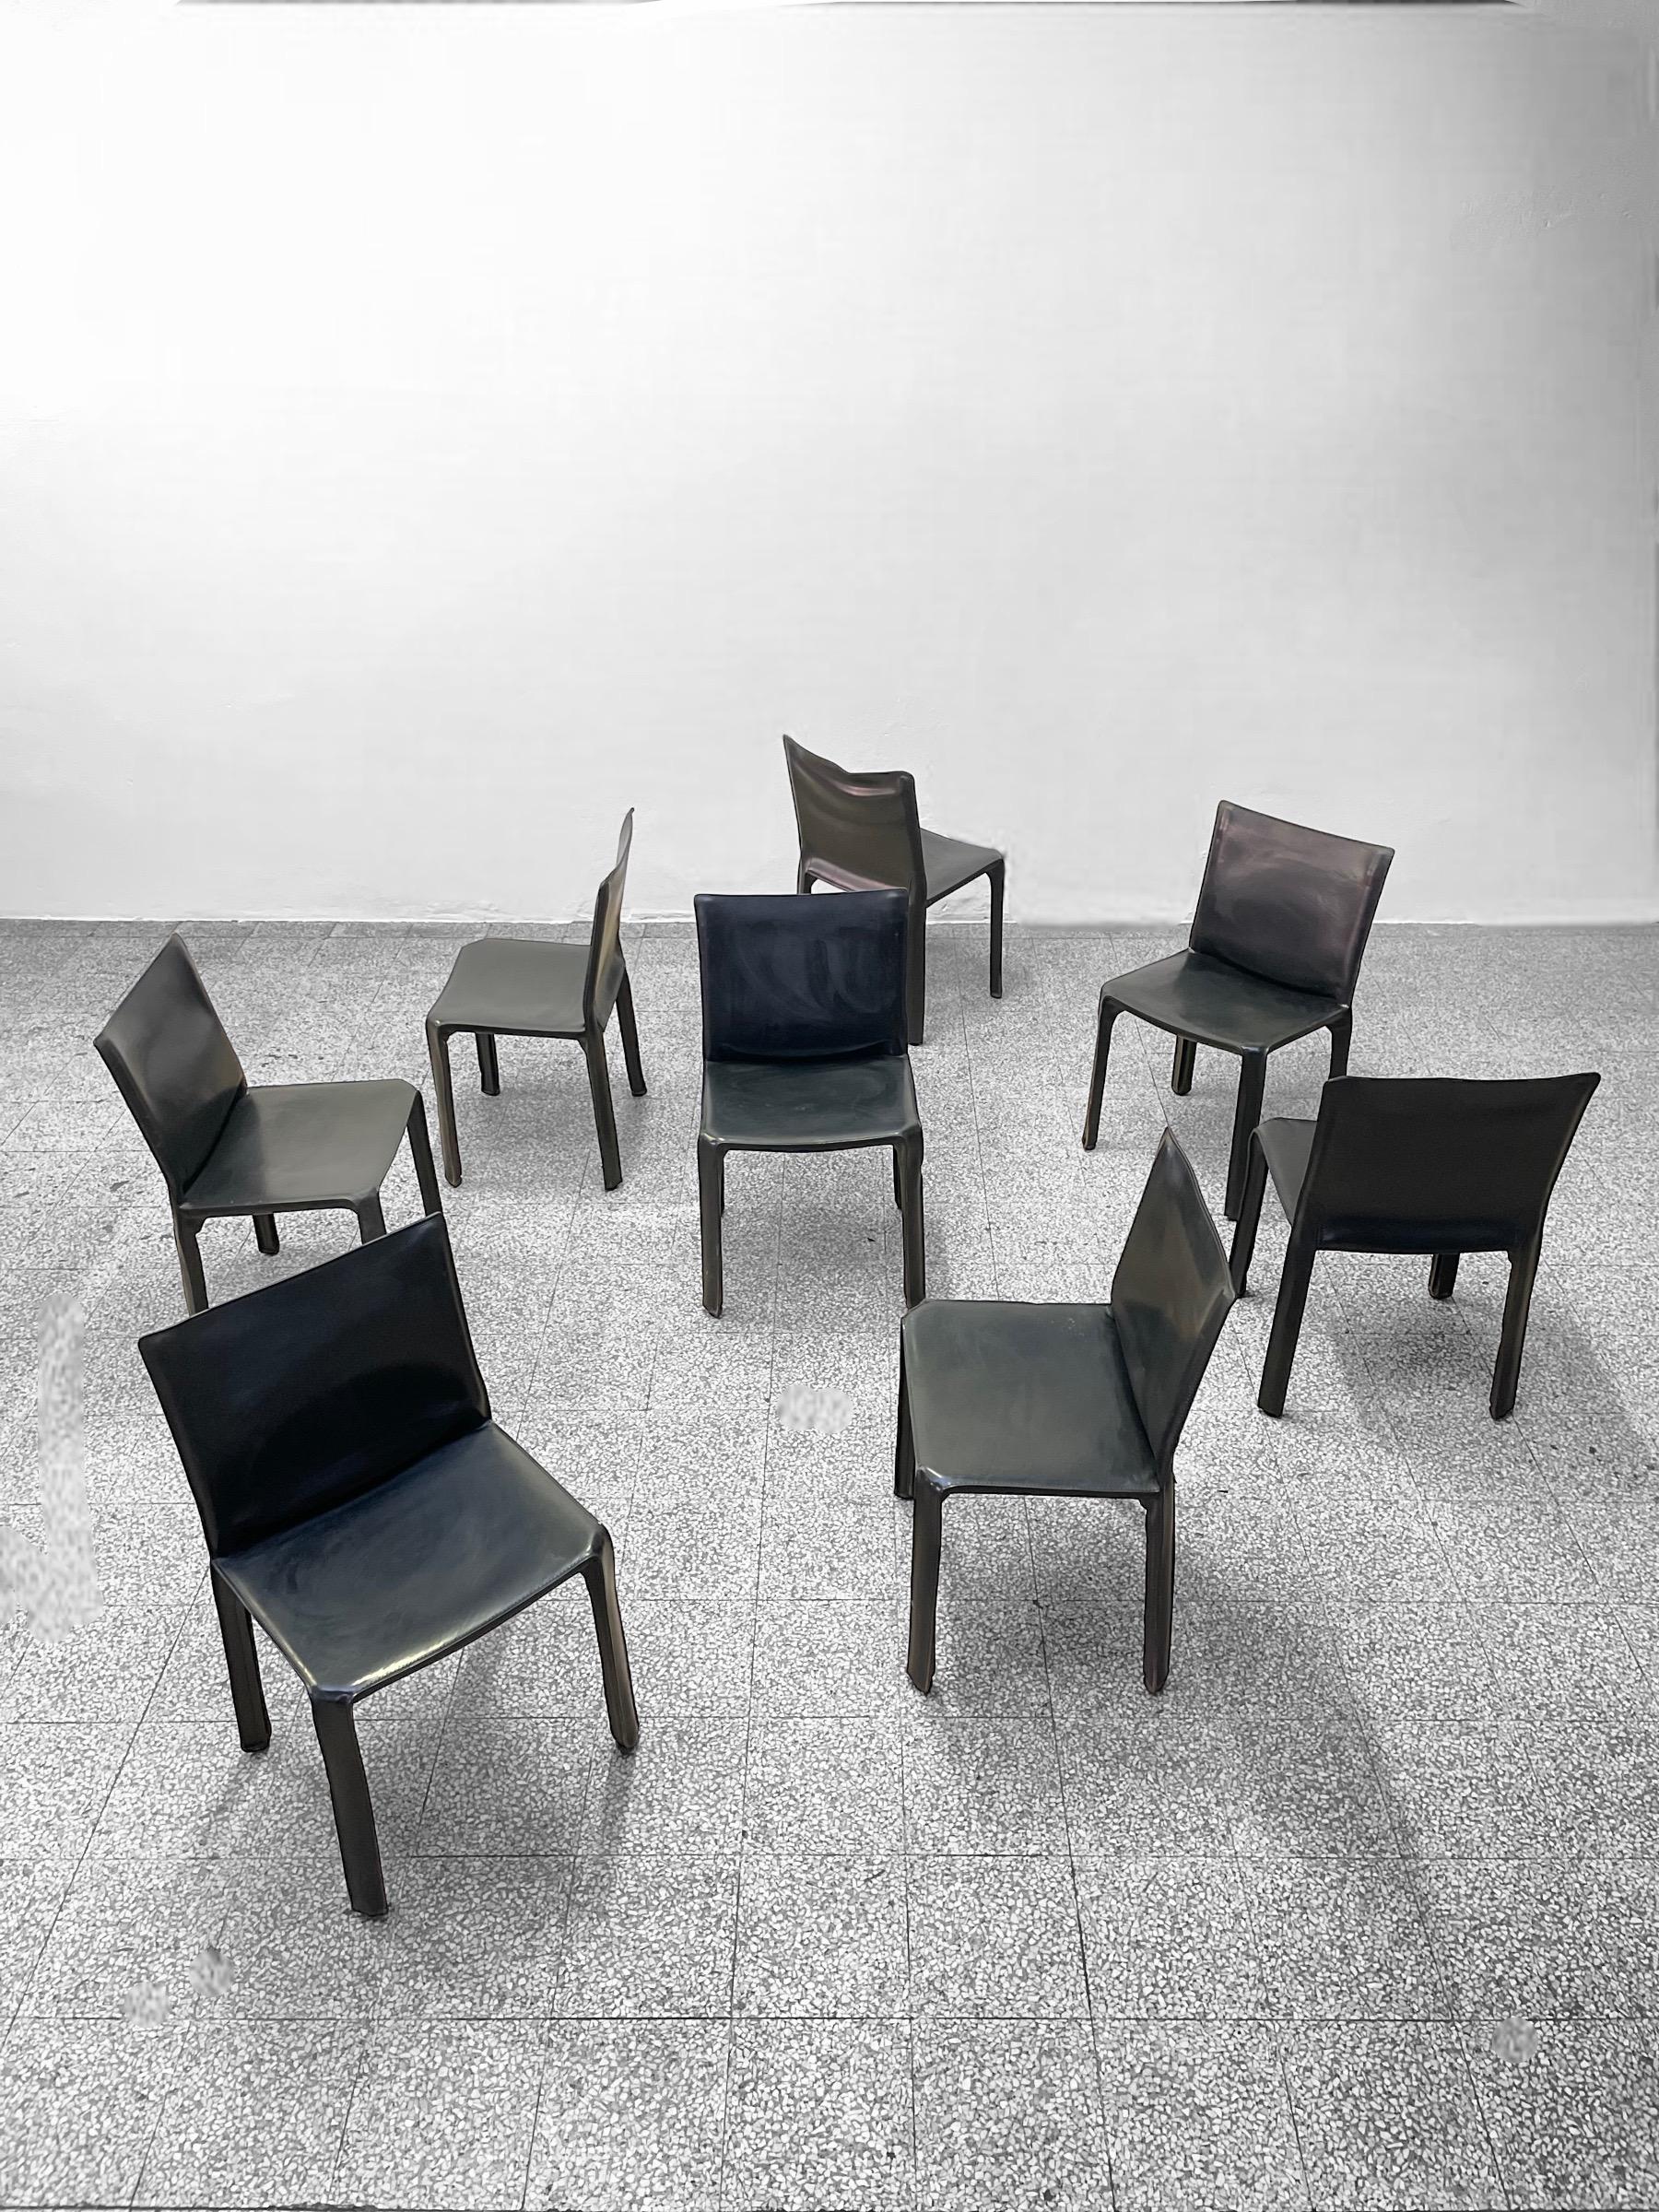 A set of eight Italian design icons in black saddle leather.

When first produced in 1977, the CAB was the first chair to feature a free-standing leather structure, inspired by how human skin fits over our skeleton. The leather upholstery is